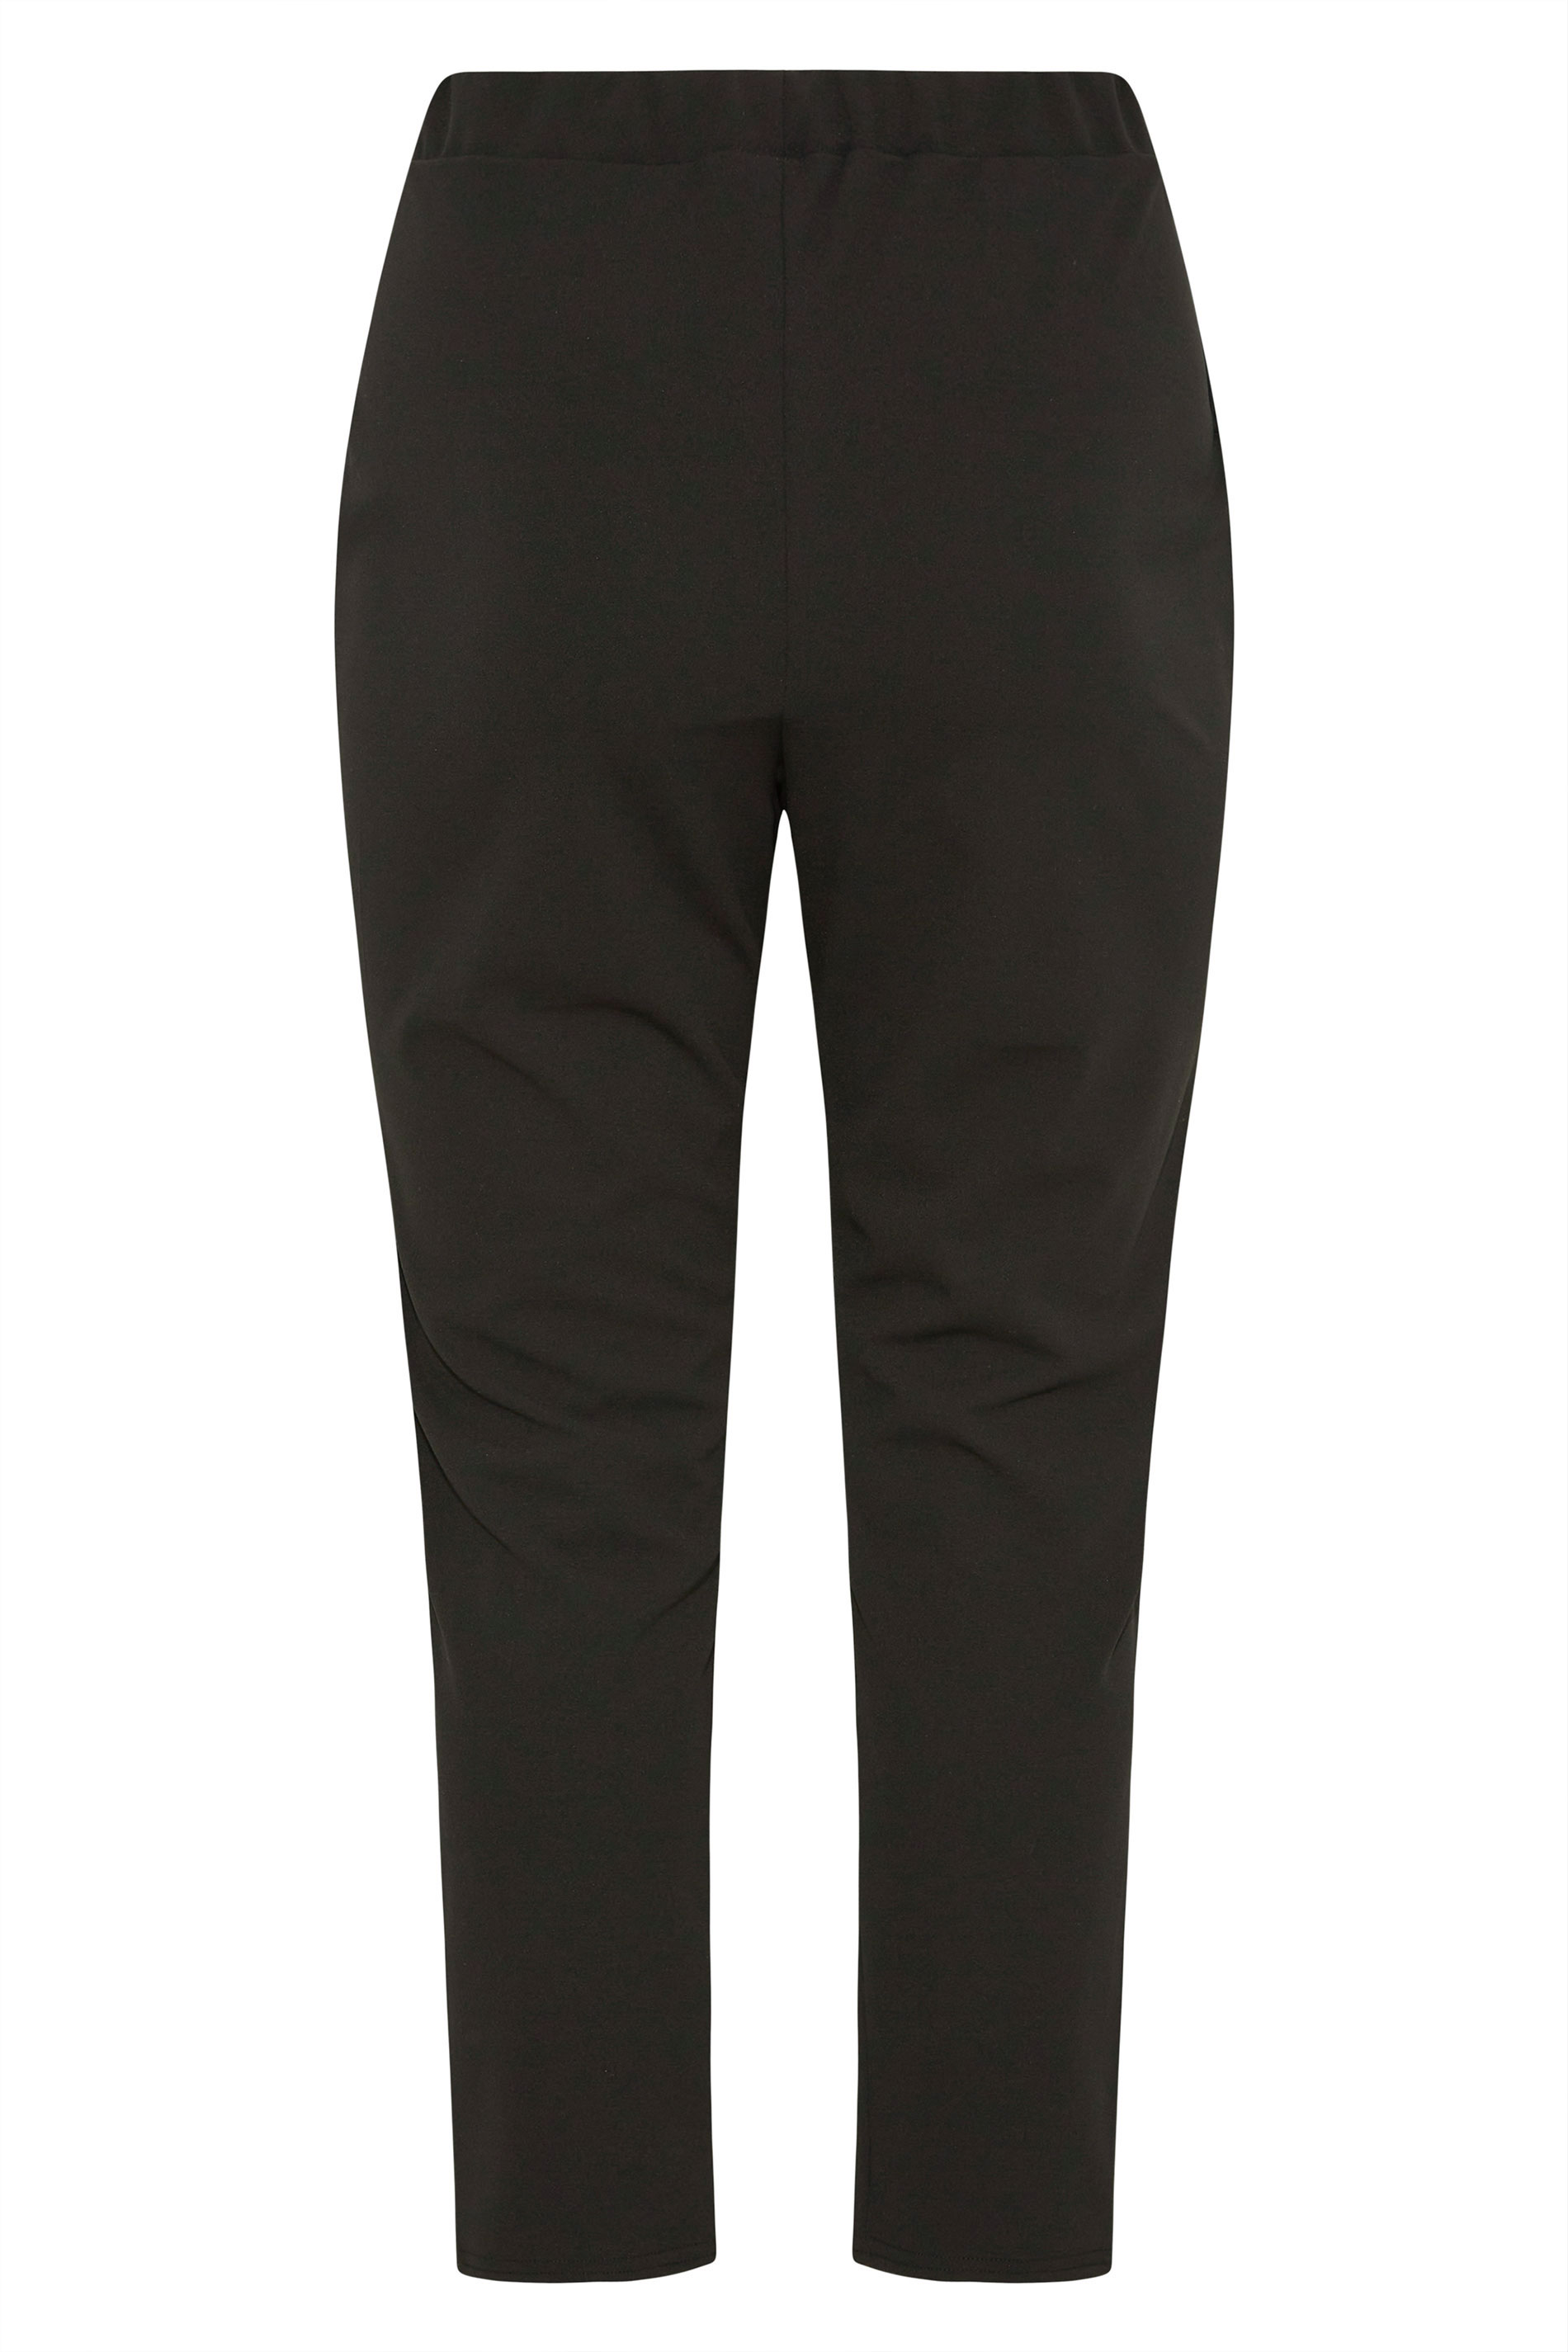 New Look Tapered Tie Waist Trousers | ASOS